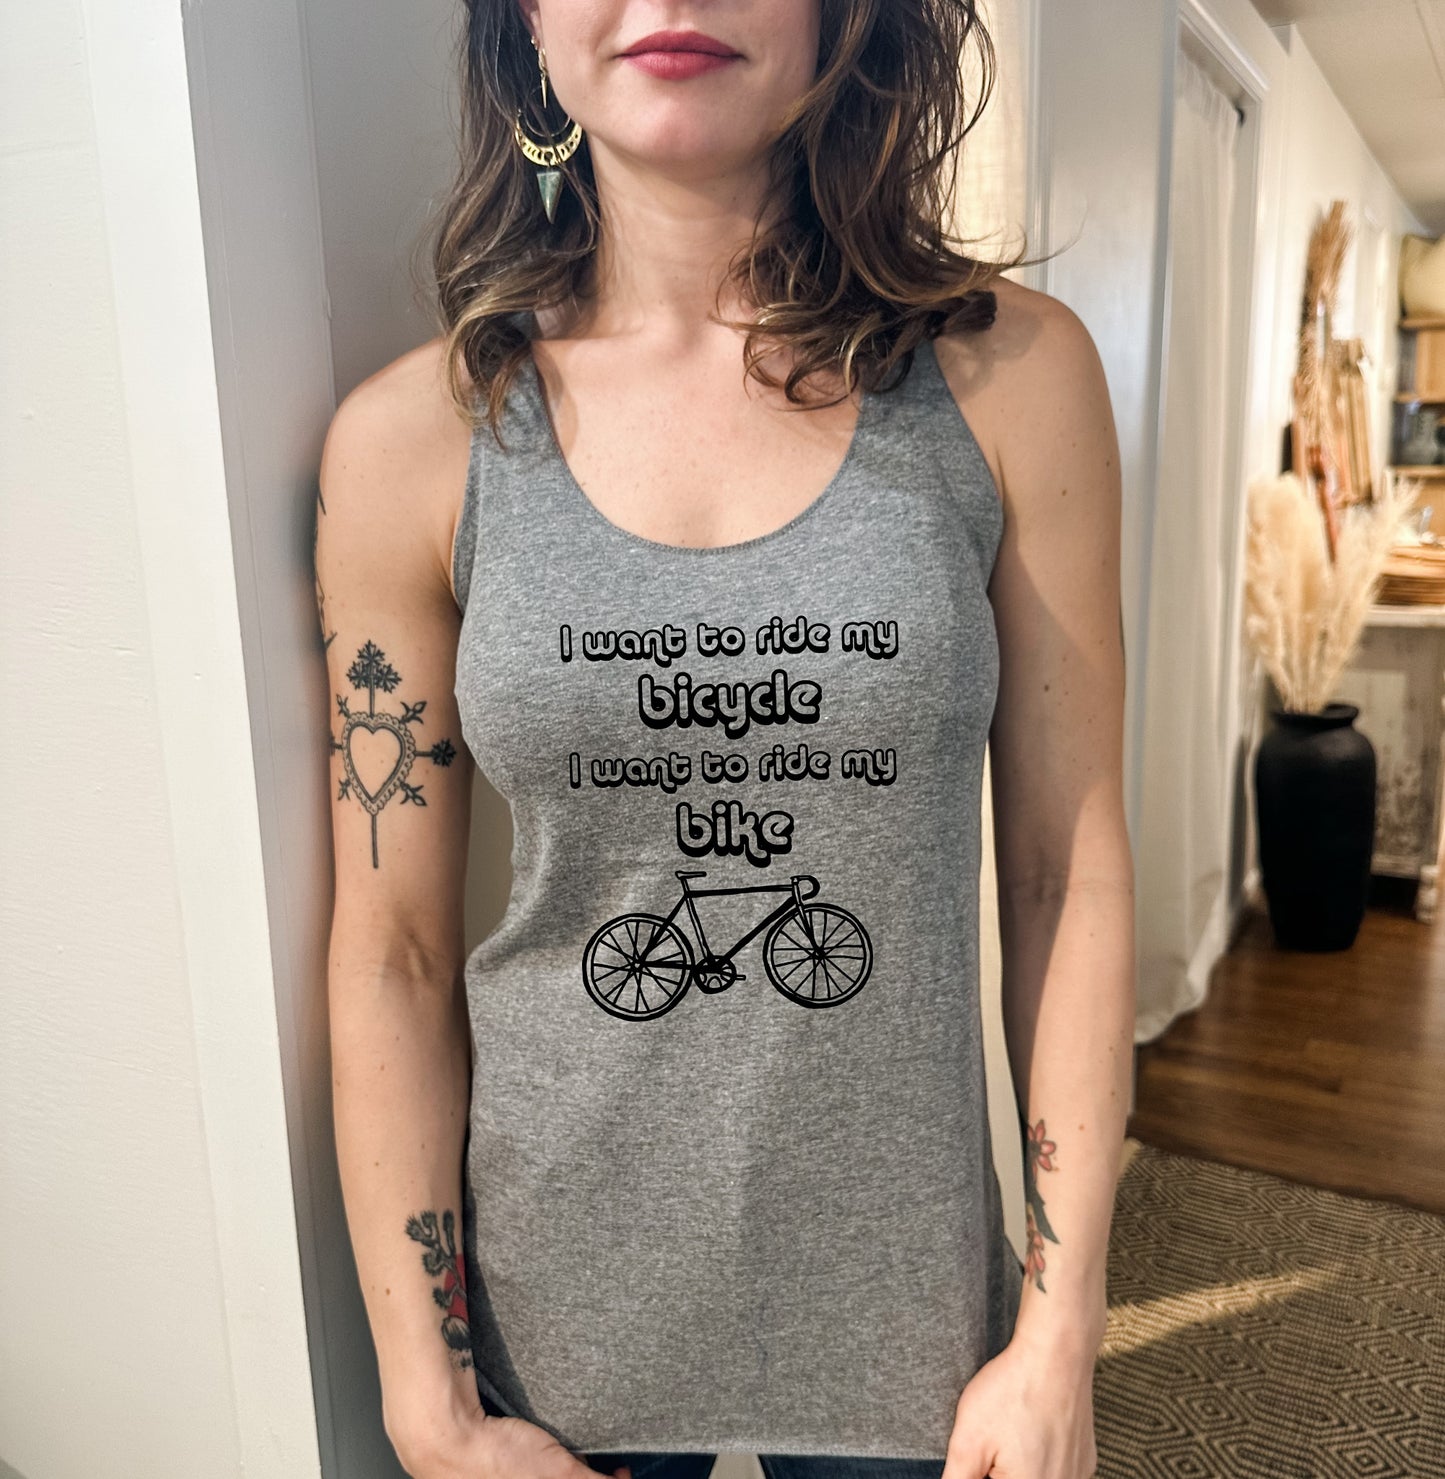 I Want To Ride My Bicycle, I Want To Ride My Bike - Women's Tank - Heather Gray, Tahiti, or Envy